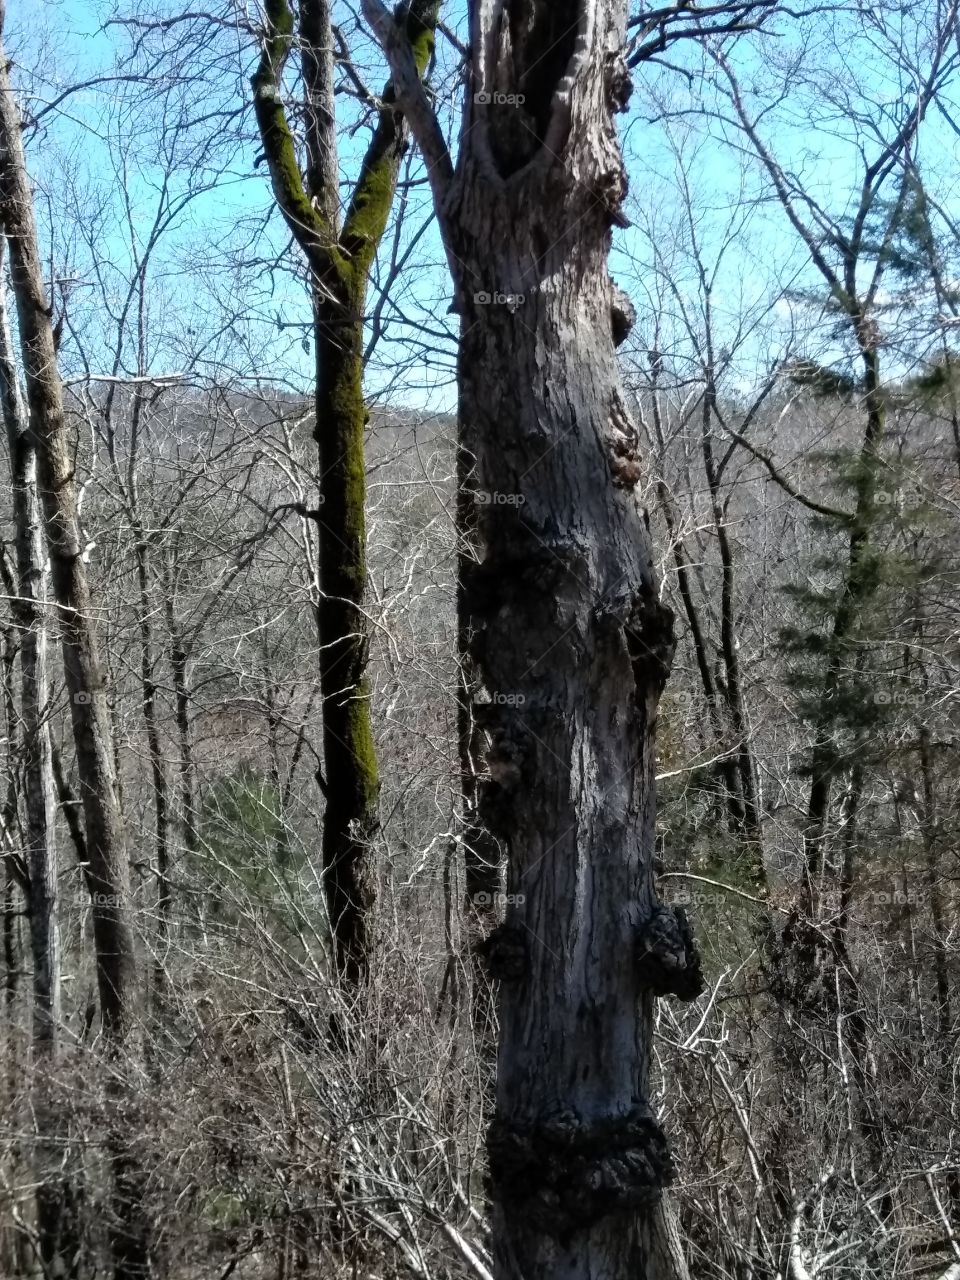 Woodland view of old and new timber in the foothills of NC.